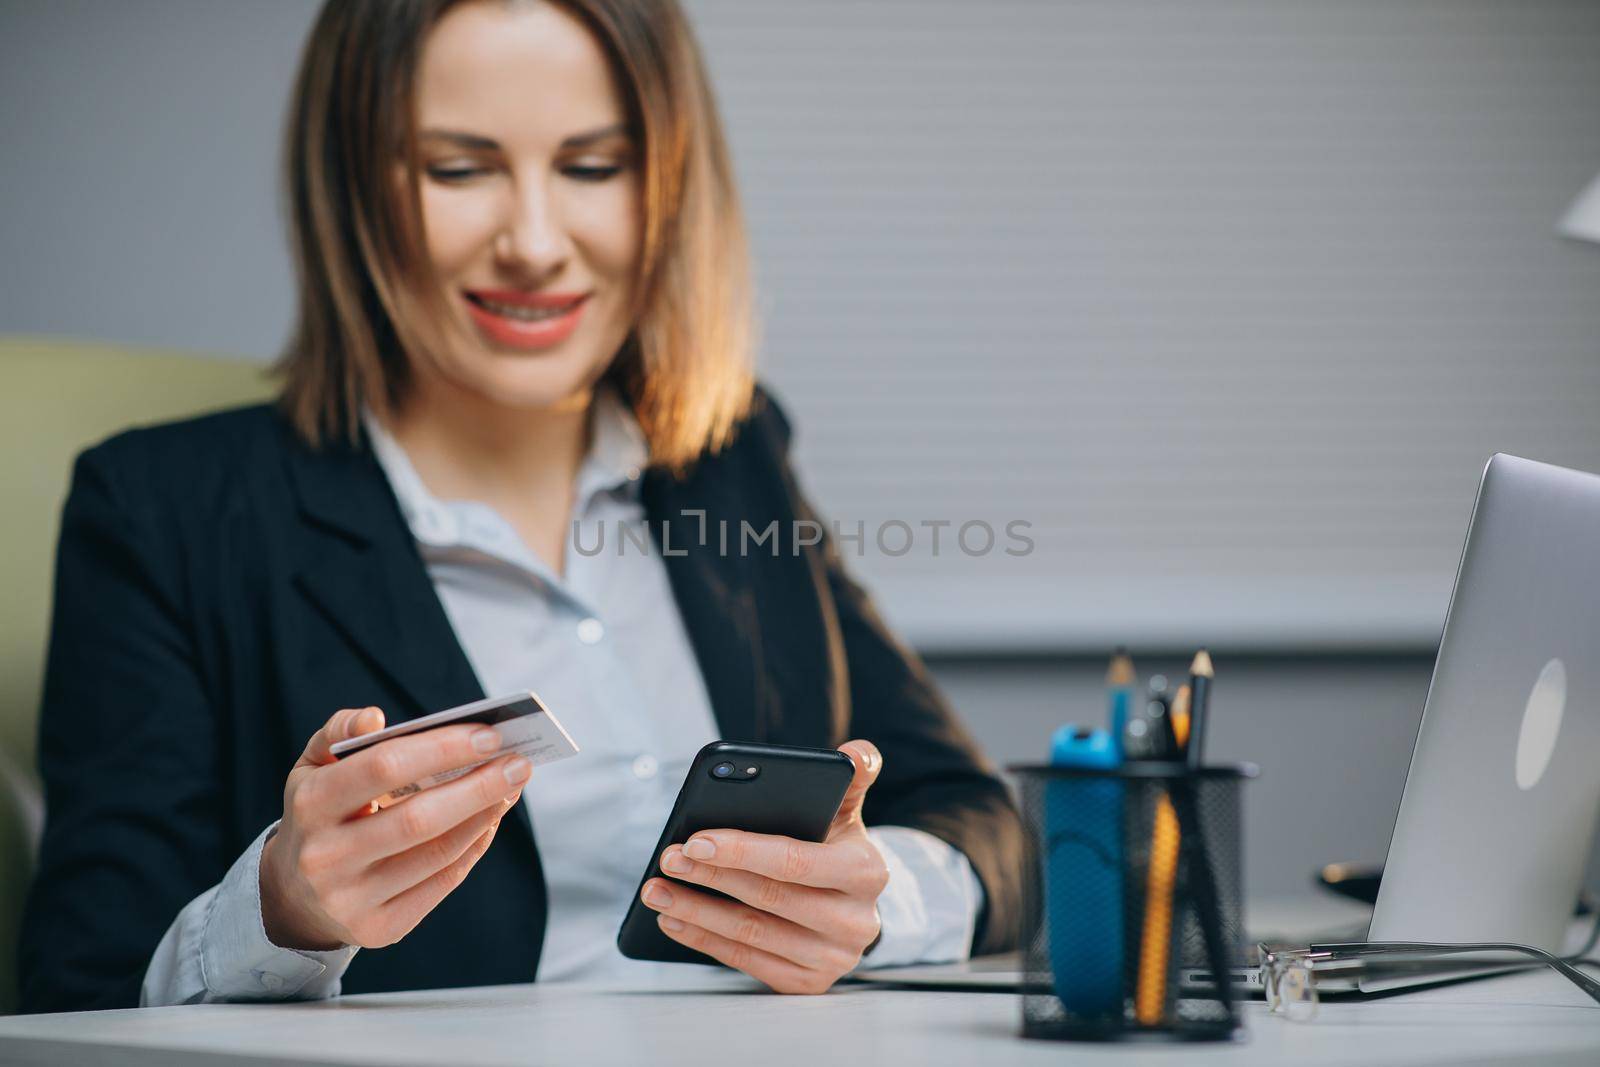 Woman Making a Card Payment through Mobile Phone to Pay Bills. An Attractive Girl Putting Debit or Credit Card Details on a Smartphone or Cellphone to Make Online Transaction by uflypro